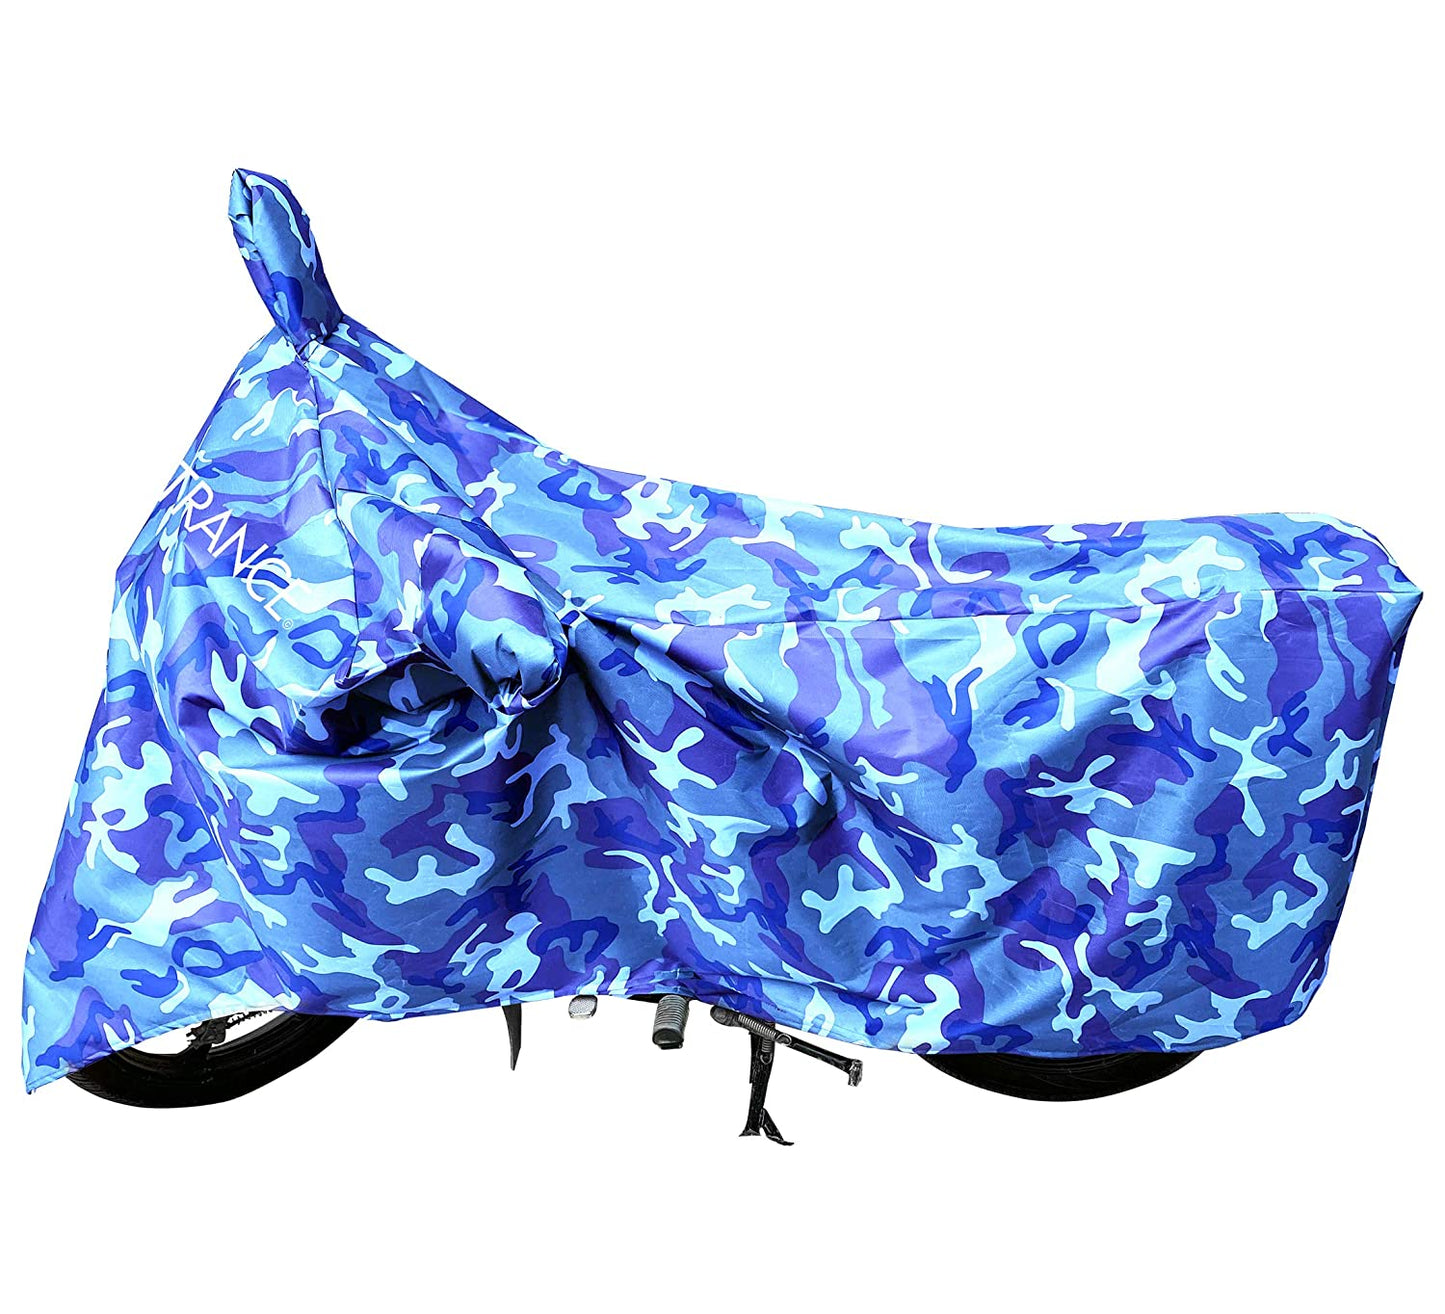 MotoTrance Jungle Bike Body Covers For Yamaha Crux - Interlock-Stitched Waterproof and Heat Resistant with Mirror Pockets